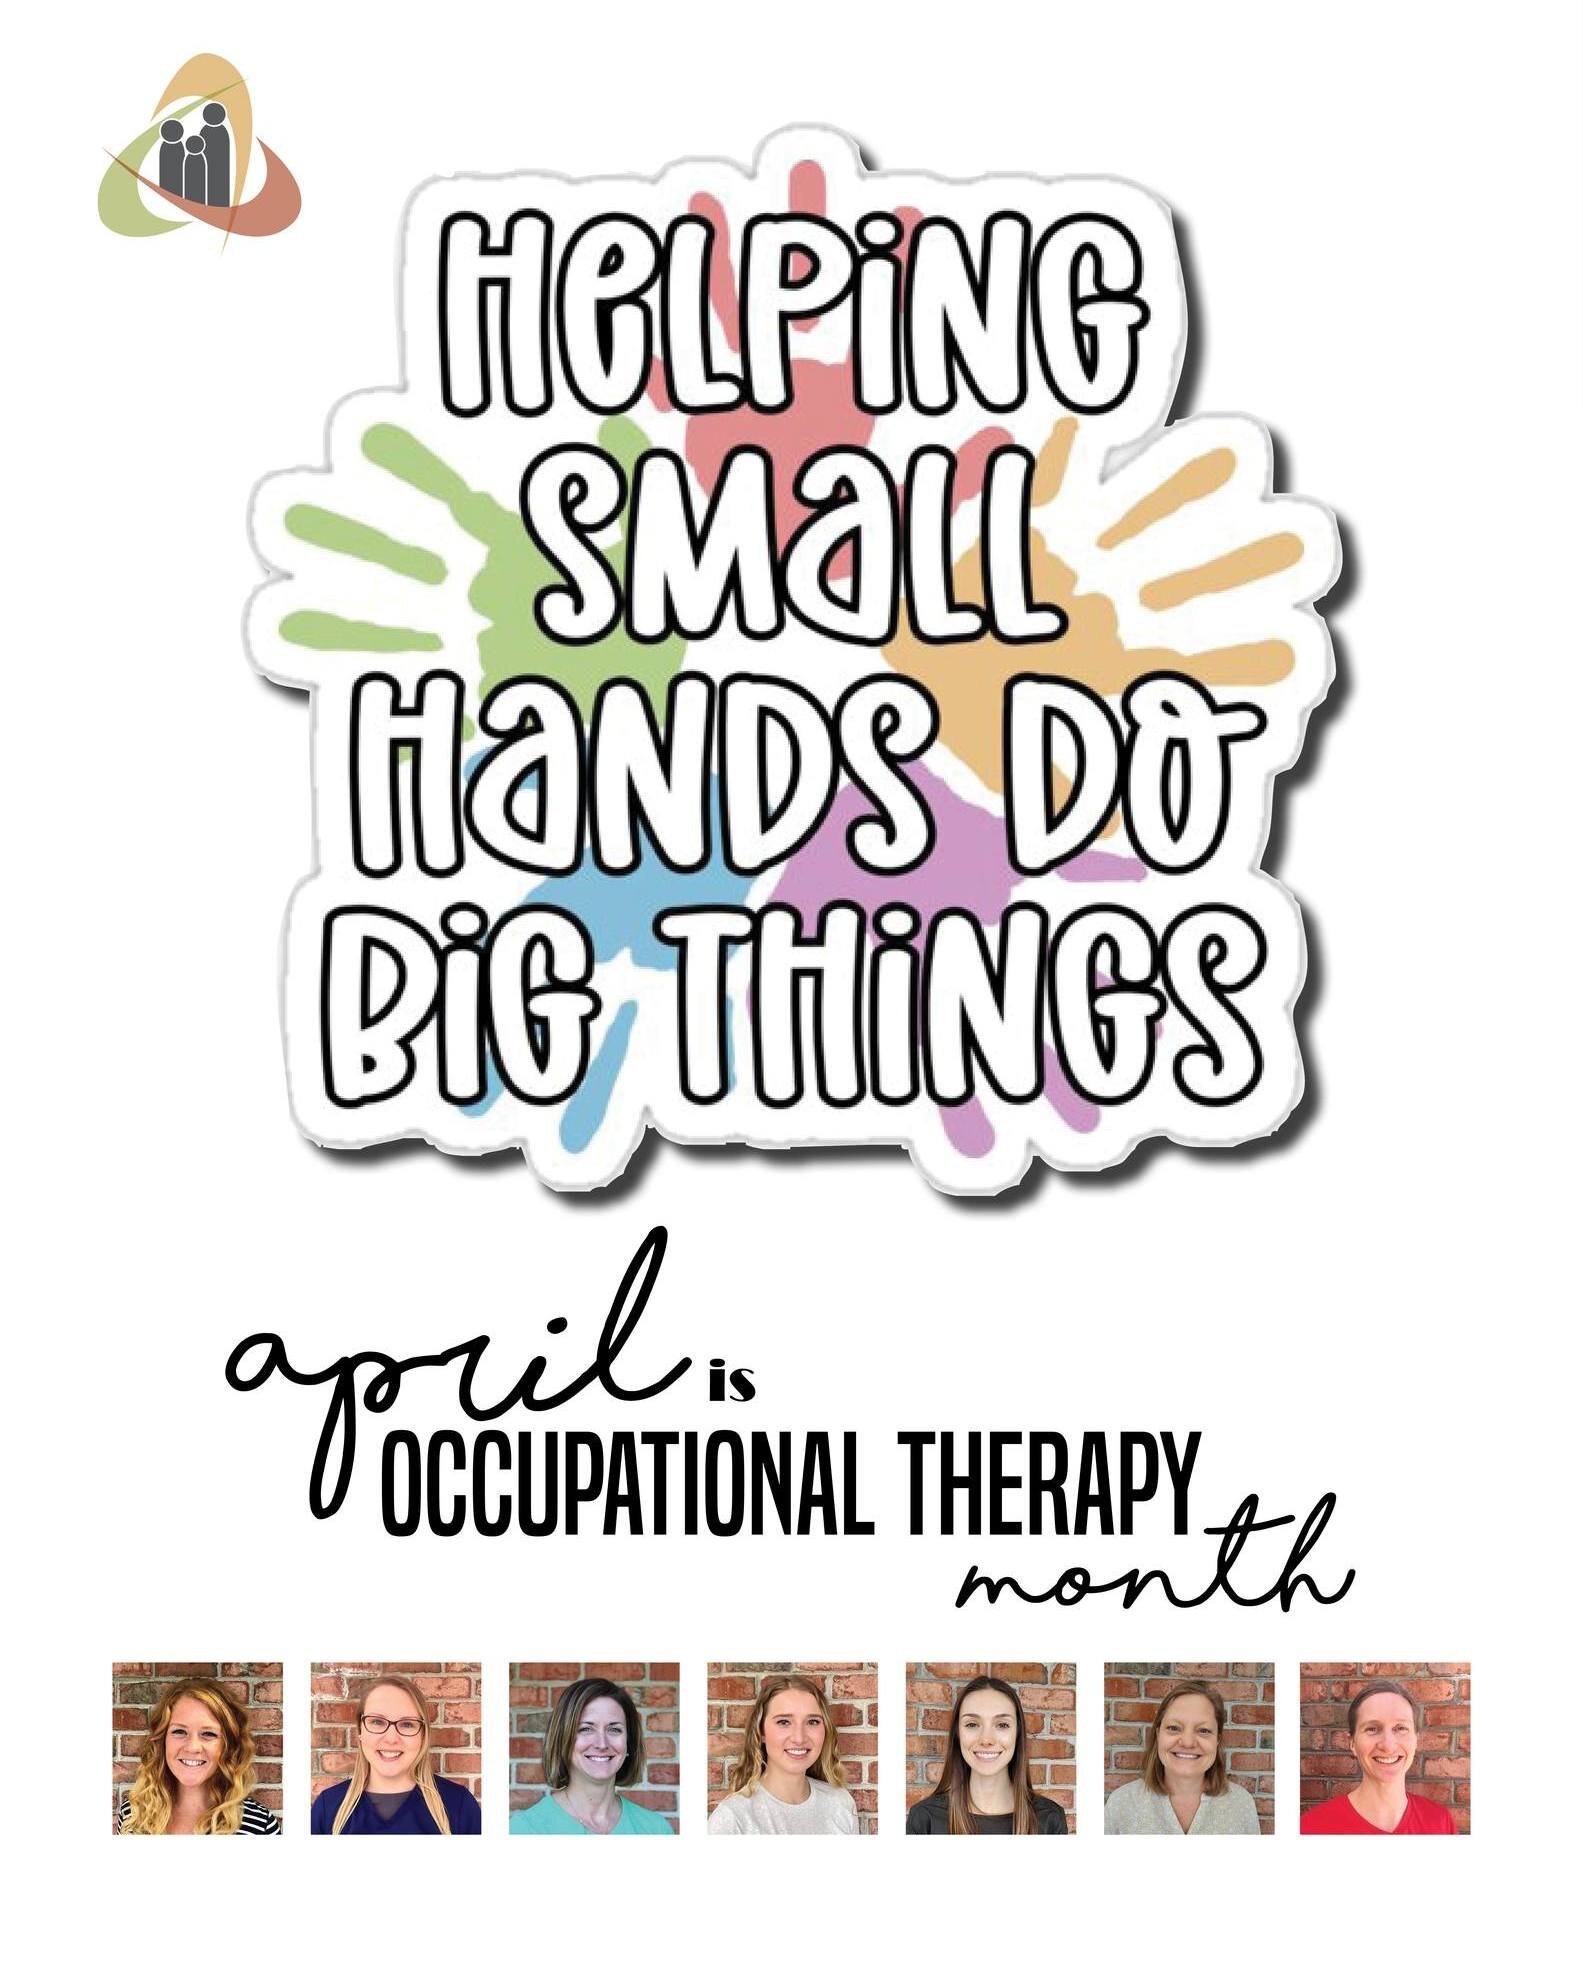 It has been great celebrating our Occupational Therapists all month long.  THANK YOU to our OT team for everything they are doing for CSTC and our clients! 

#OTmonth #occupationaltherapy  #CSTCJackson #finemotorskills